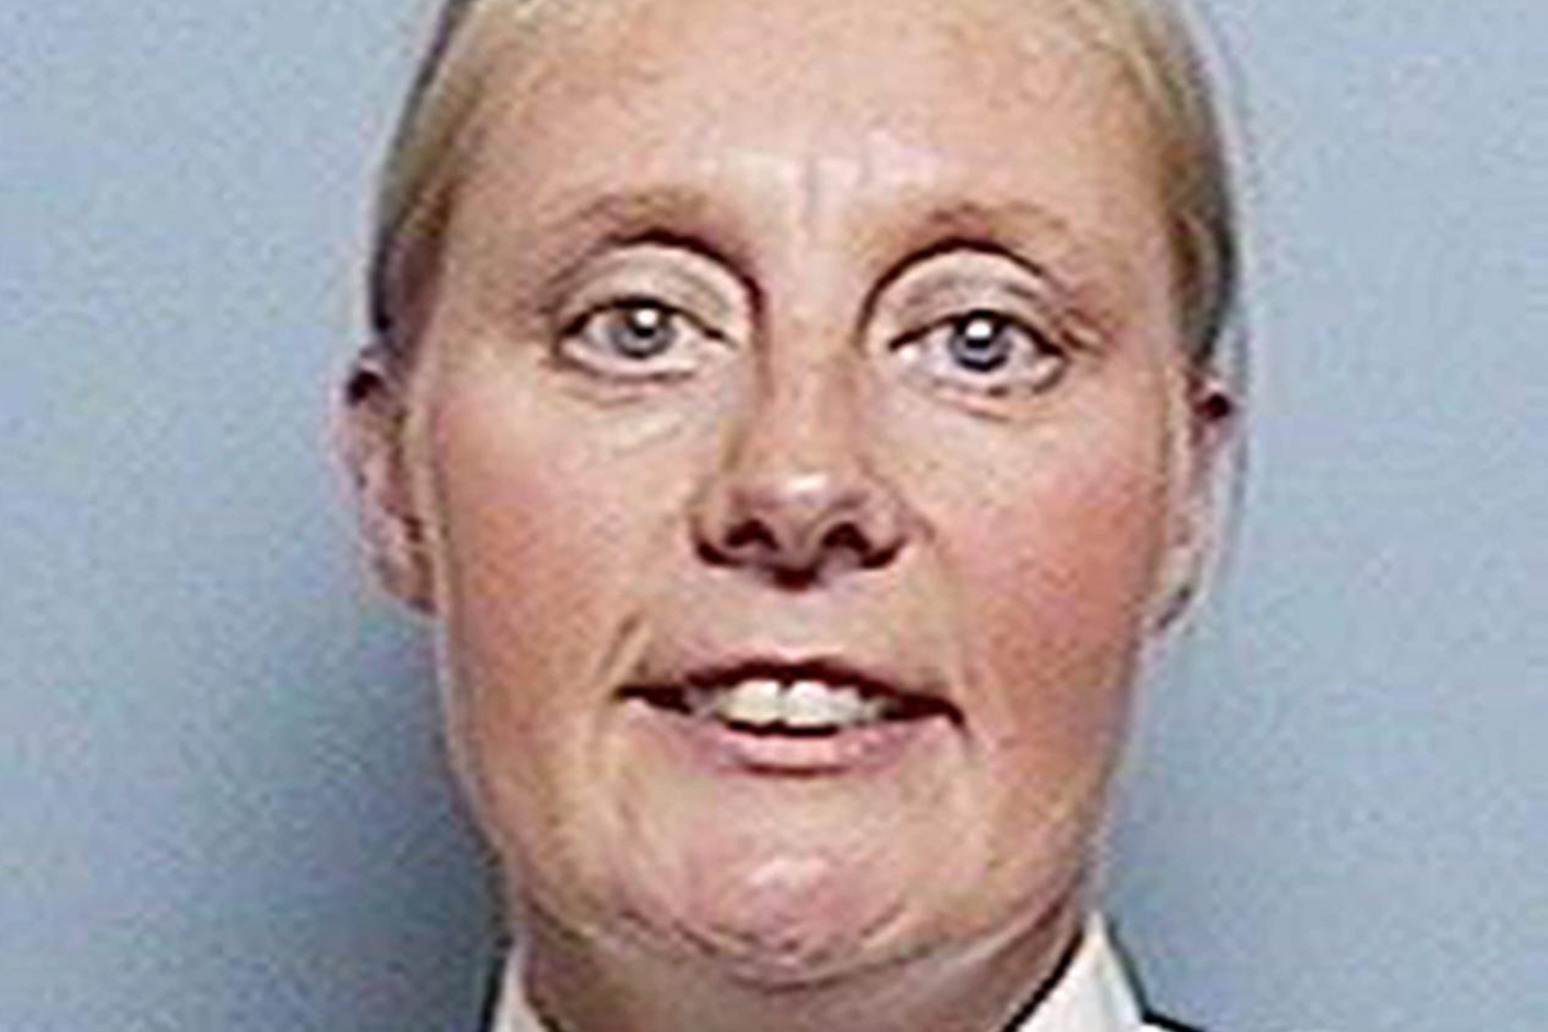 Man to appear in court charged with murder of Pc Sharon Beshenivsky in 2005 